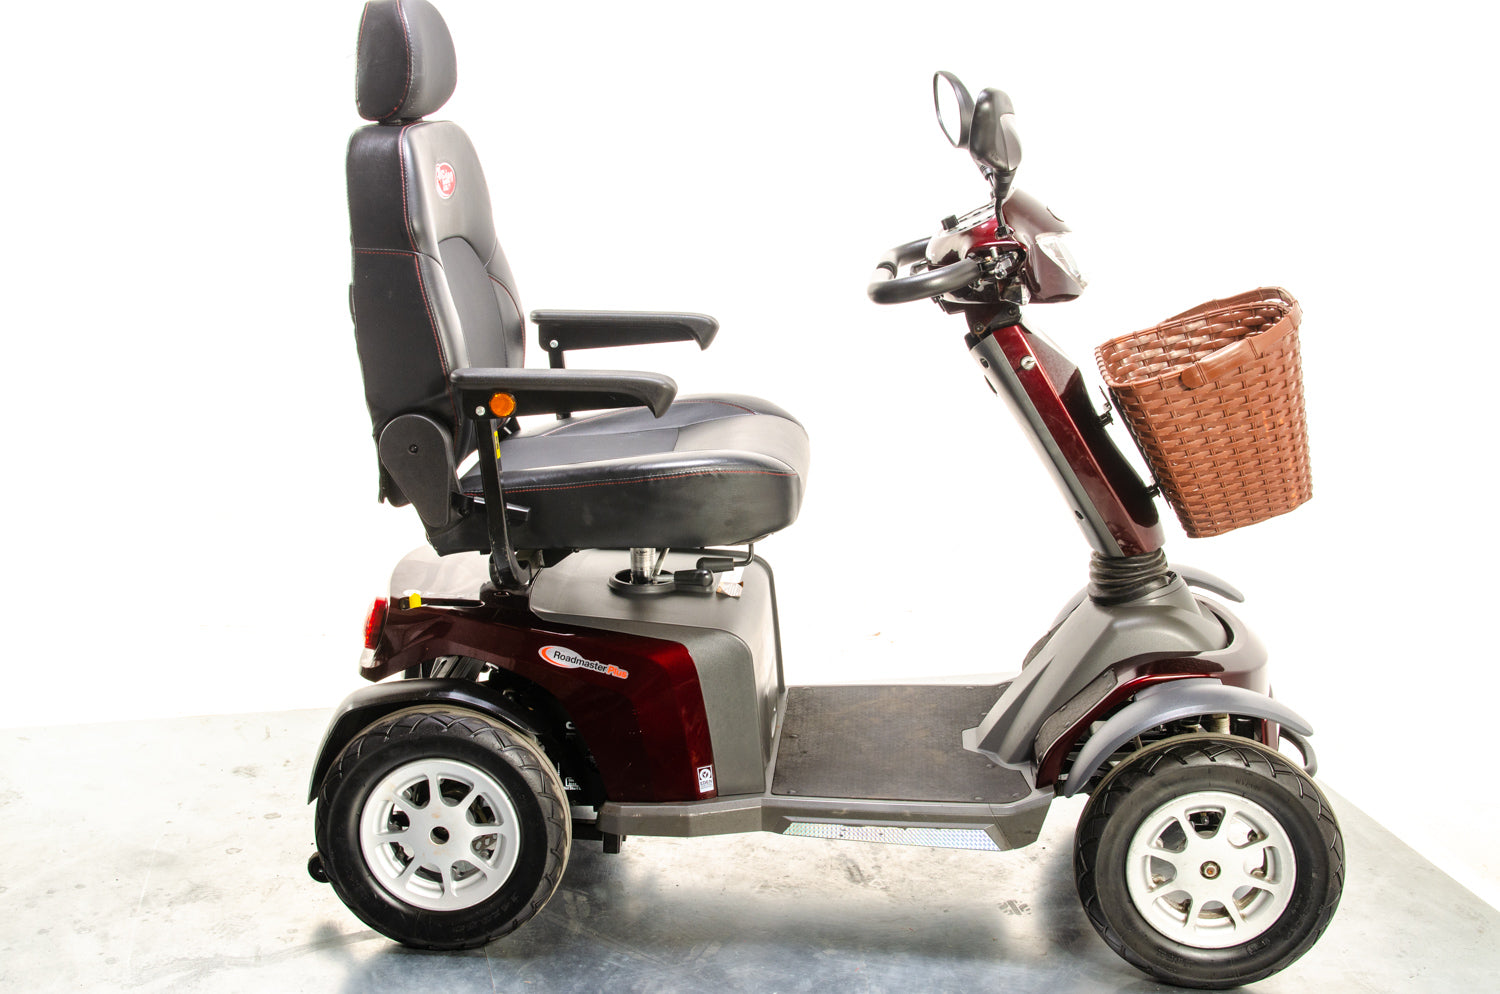 Eden Roadmaster Plus All-Terrain Off-Road Used Mobility Scooter 8mph ATV Luxury Electric Large 13978